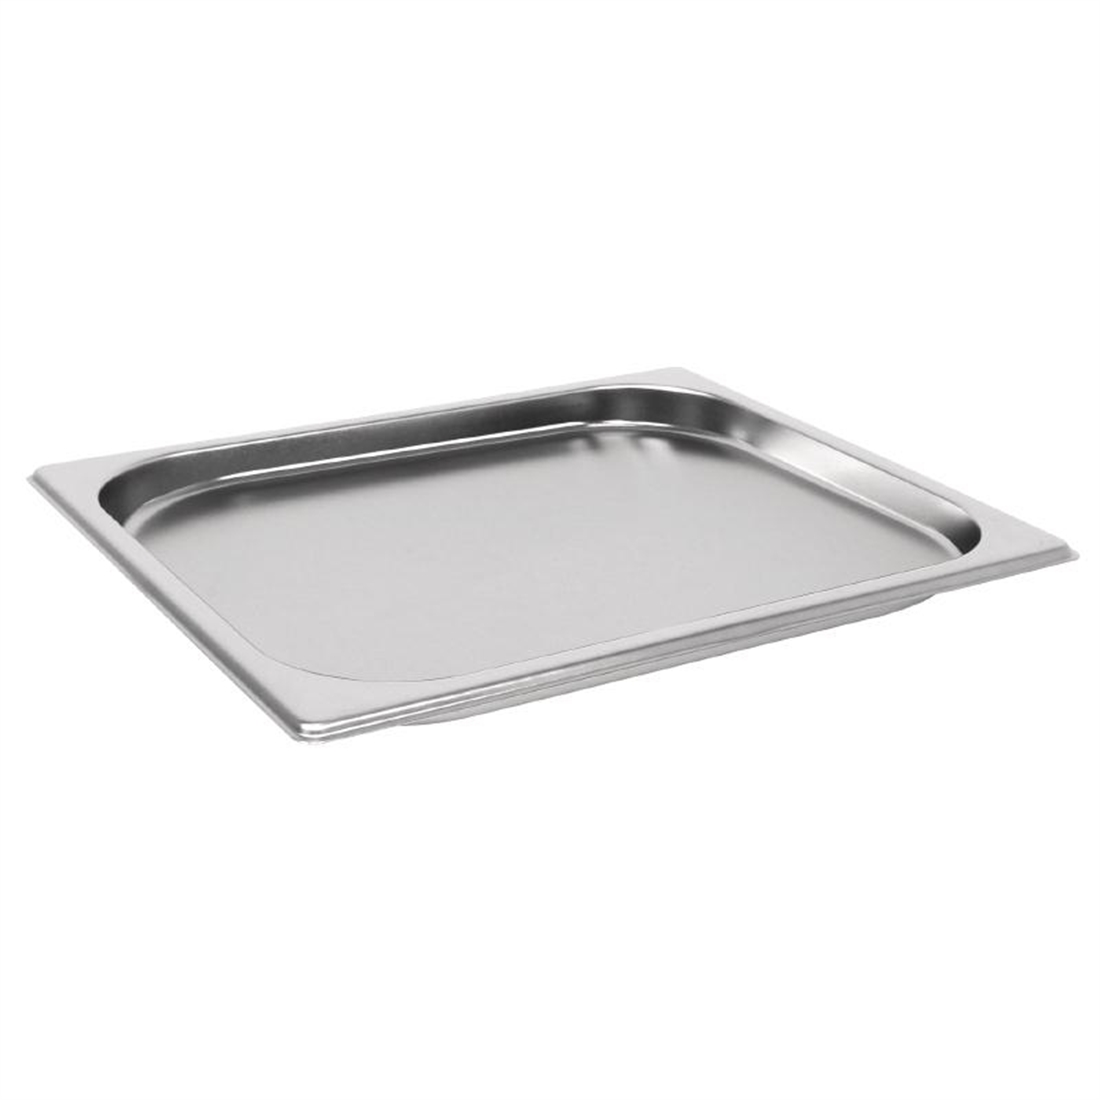 Vogue Stainless Steel Heavy Duty GN 1/2 Pan 20mm